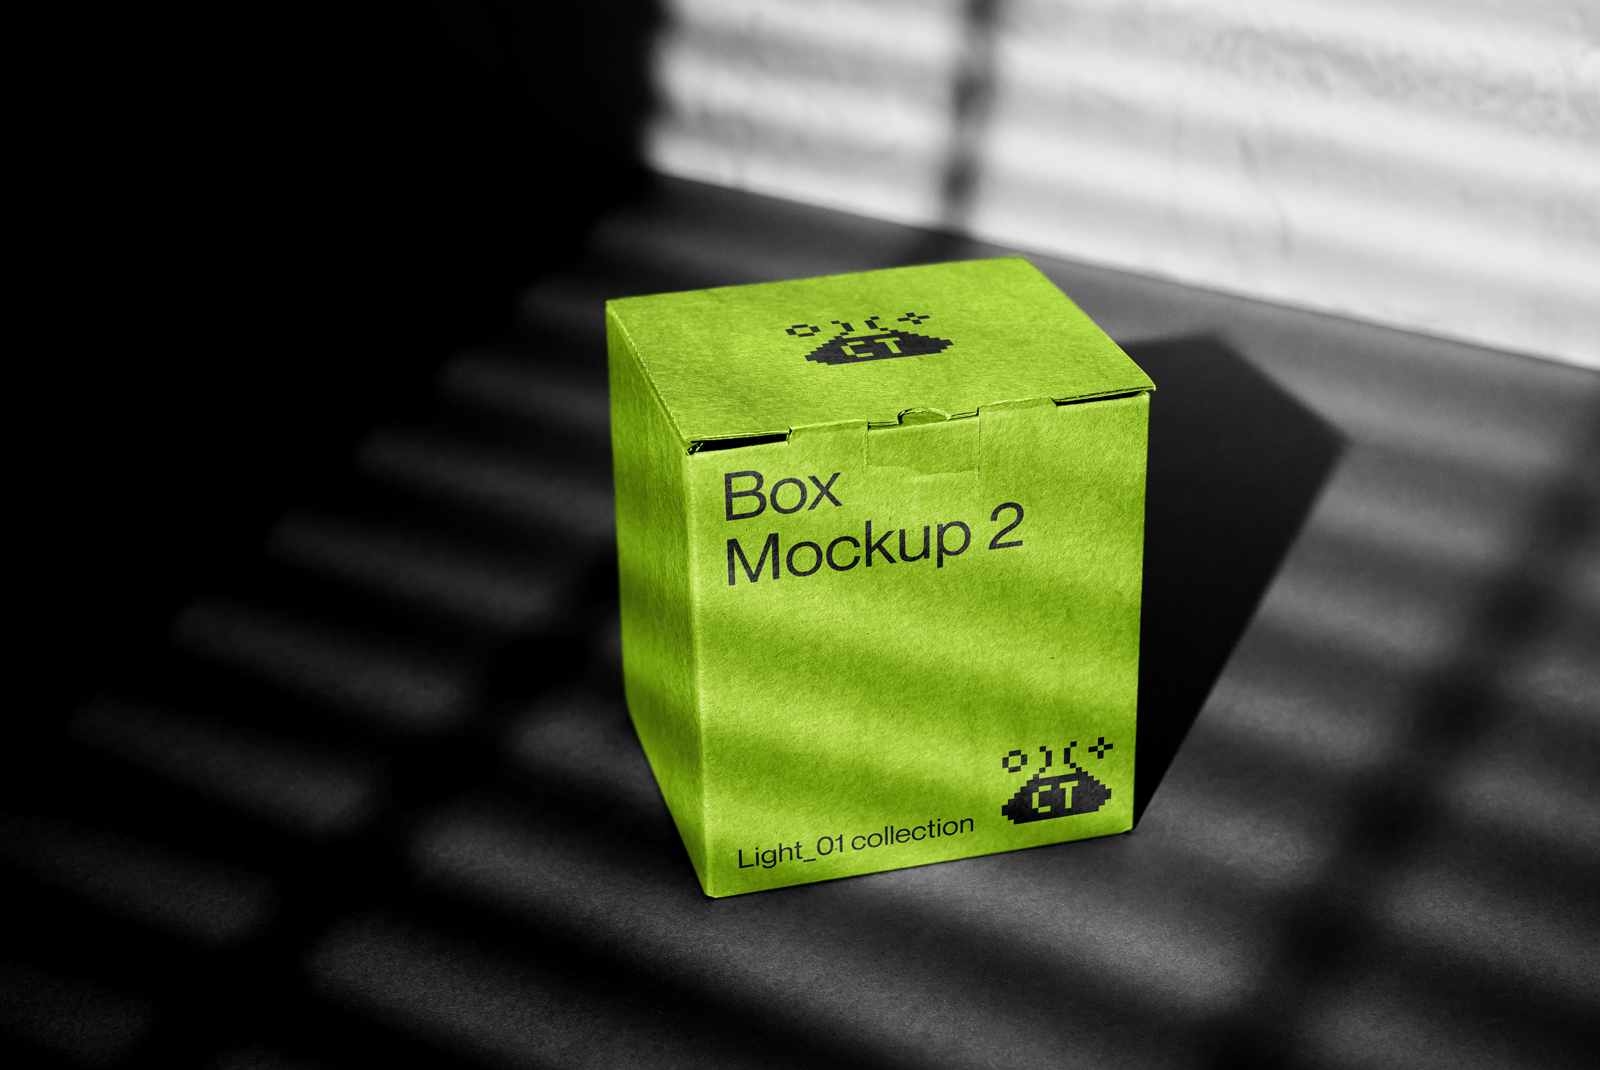 Bright green box mockup in a high contrast setting showcasing product packaging design on a flat surface with creative lighting and shadow play.